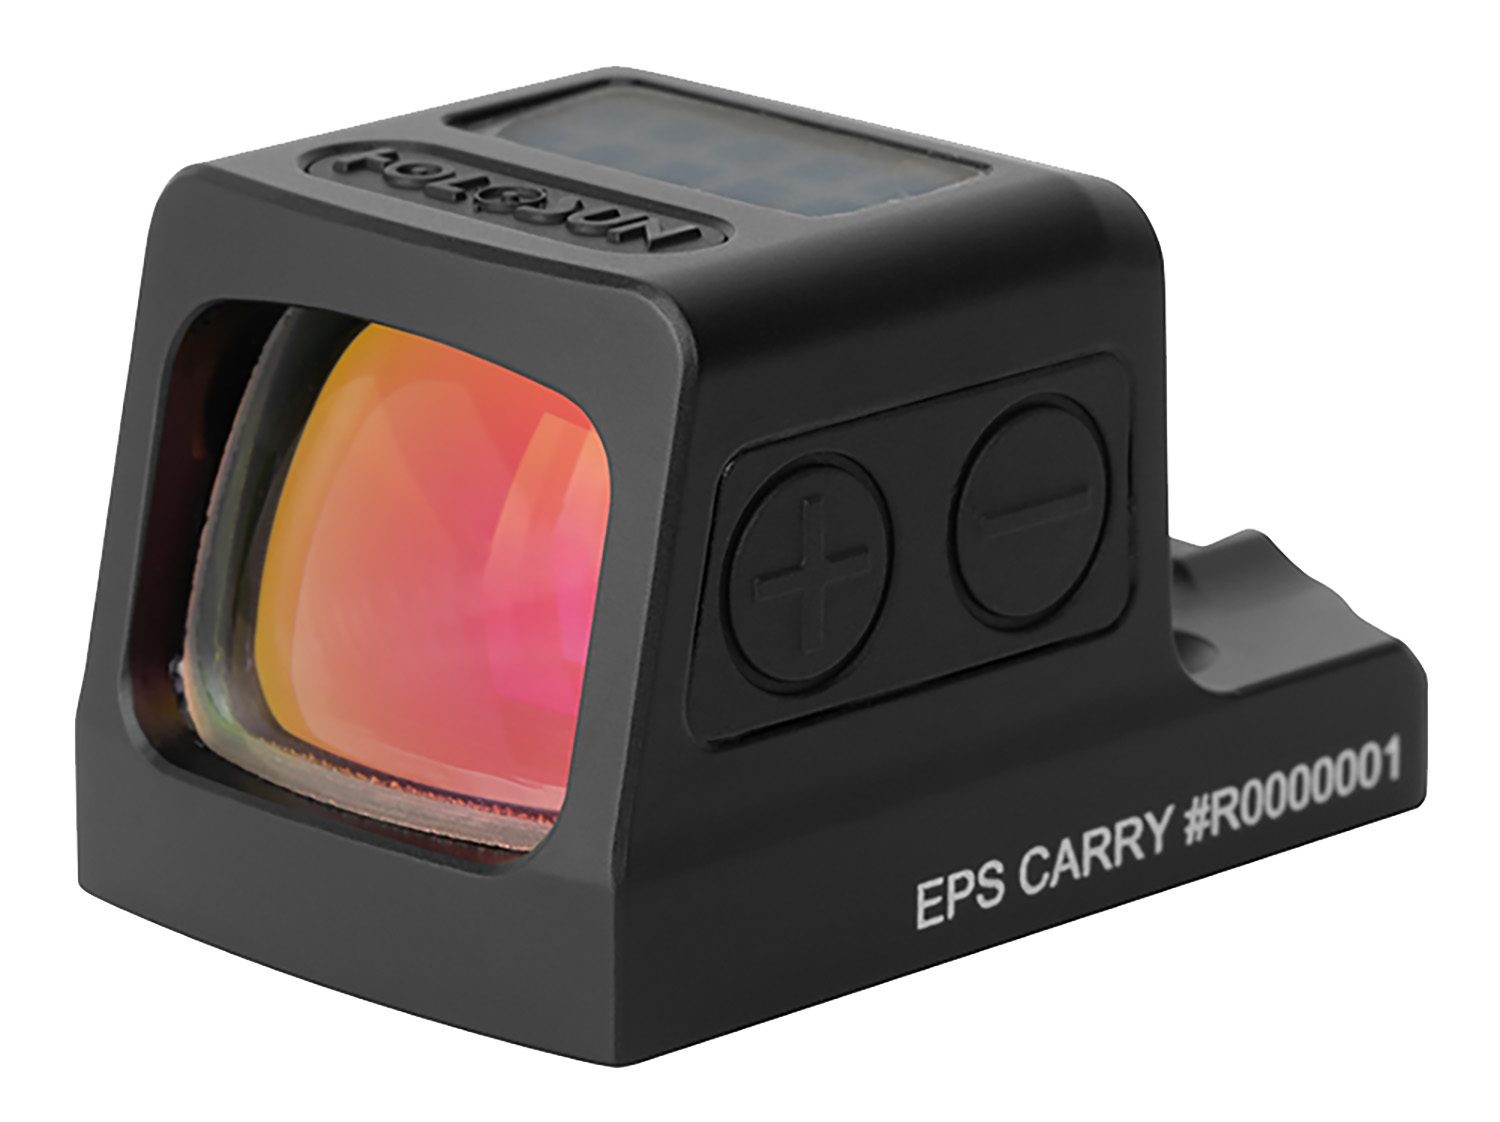 HOLOSUN EPS-CARRY-RD-6   ENCLSED PSTL SGT CRRY RED